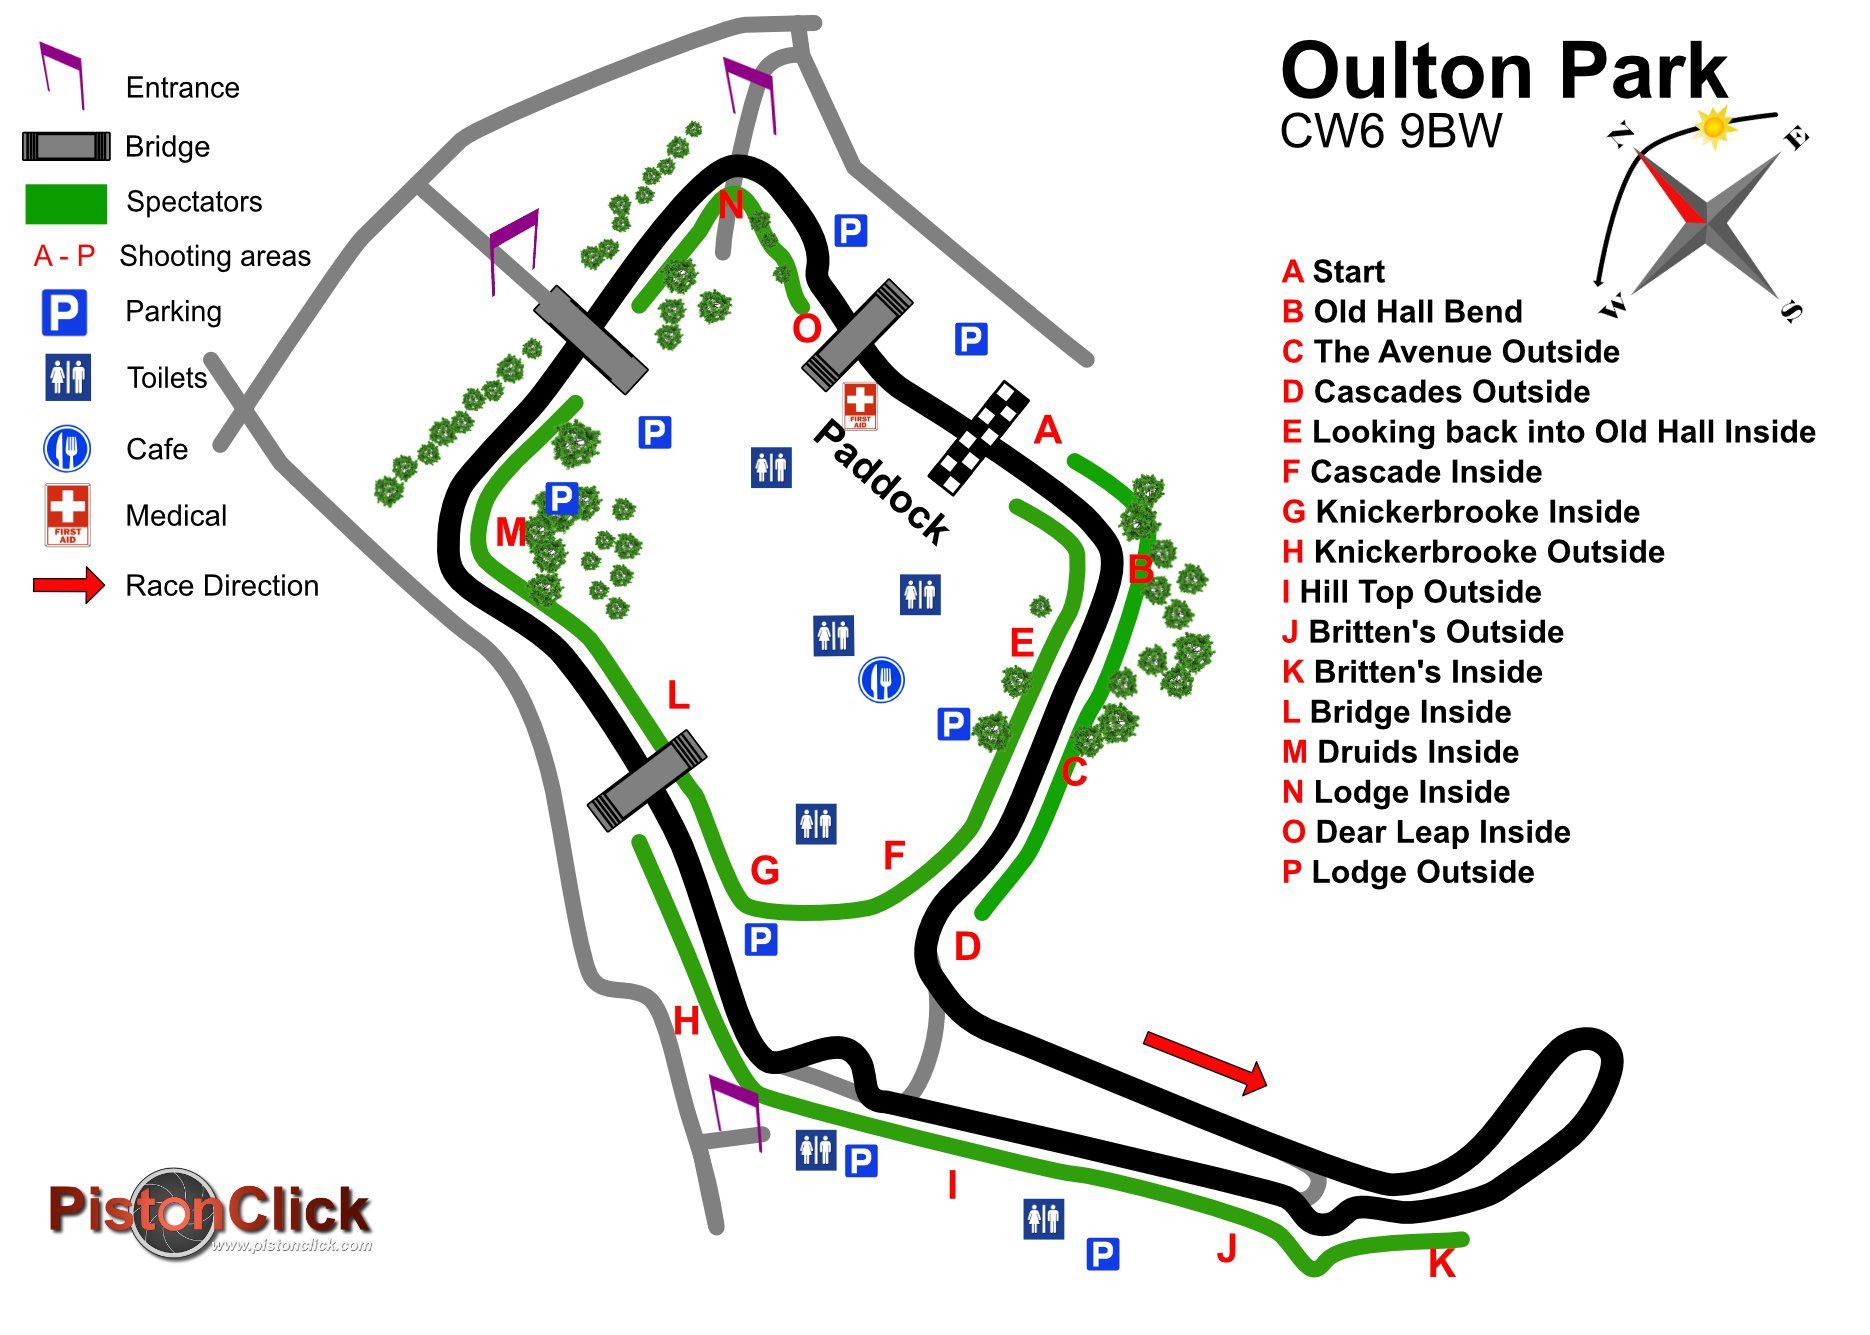 Oulton Park Map and photographic locations